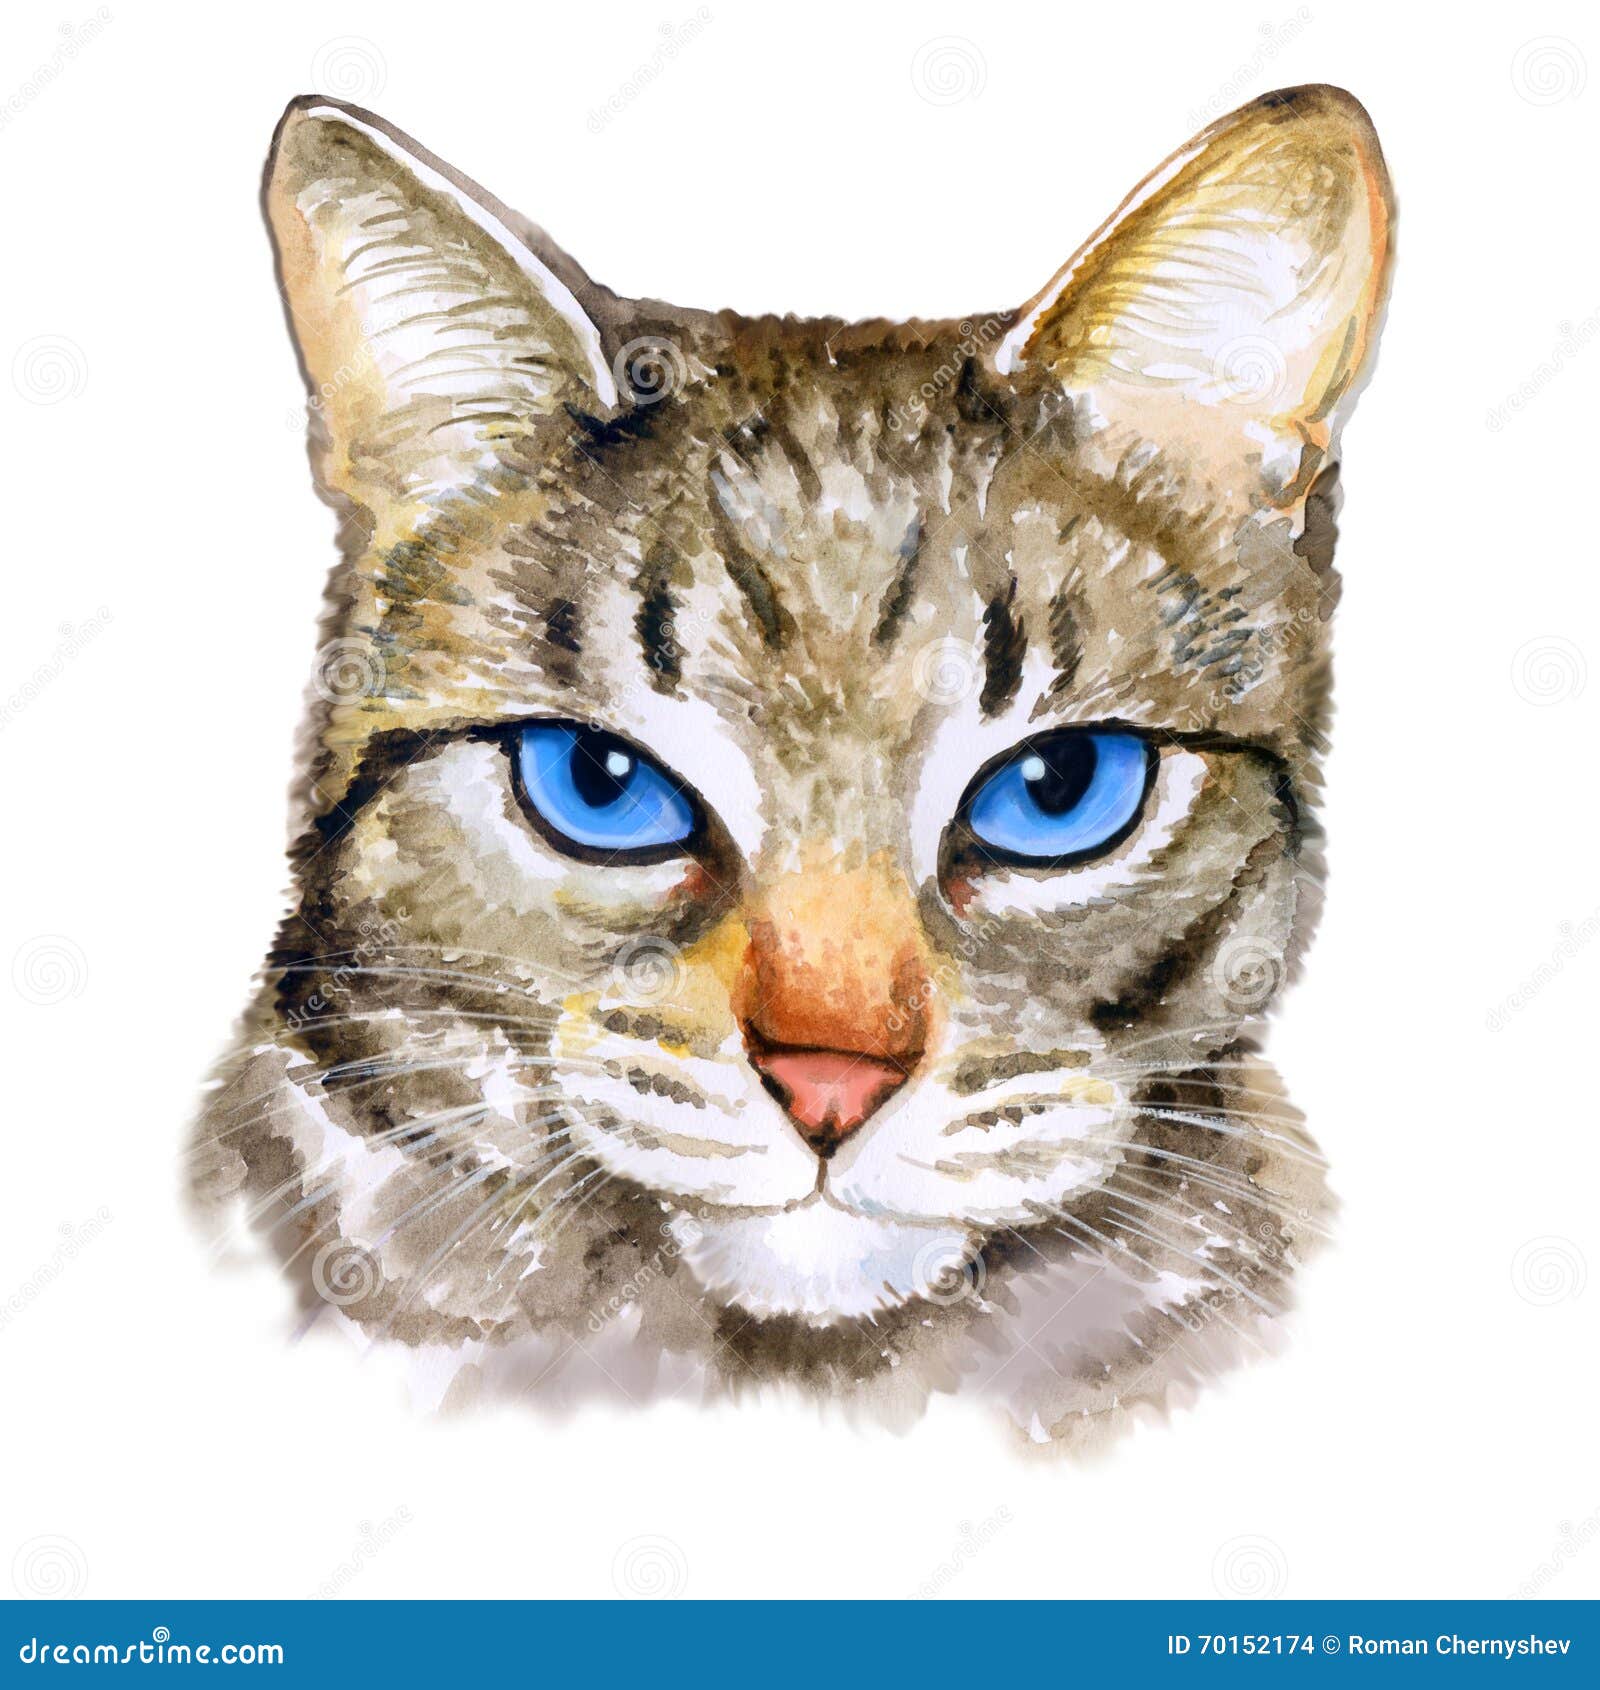 watercolor colseup portrait of ojos azules breed cat with blue eyes on white background. hand drawn home pet